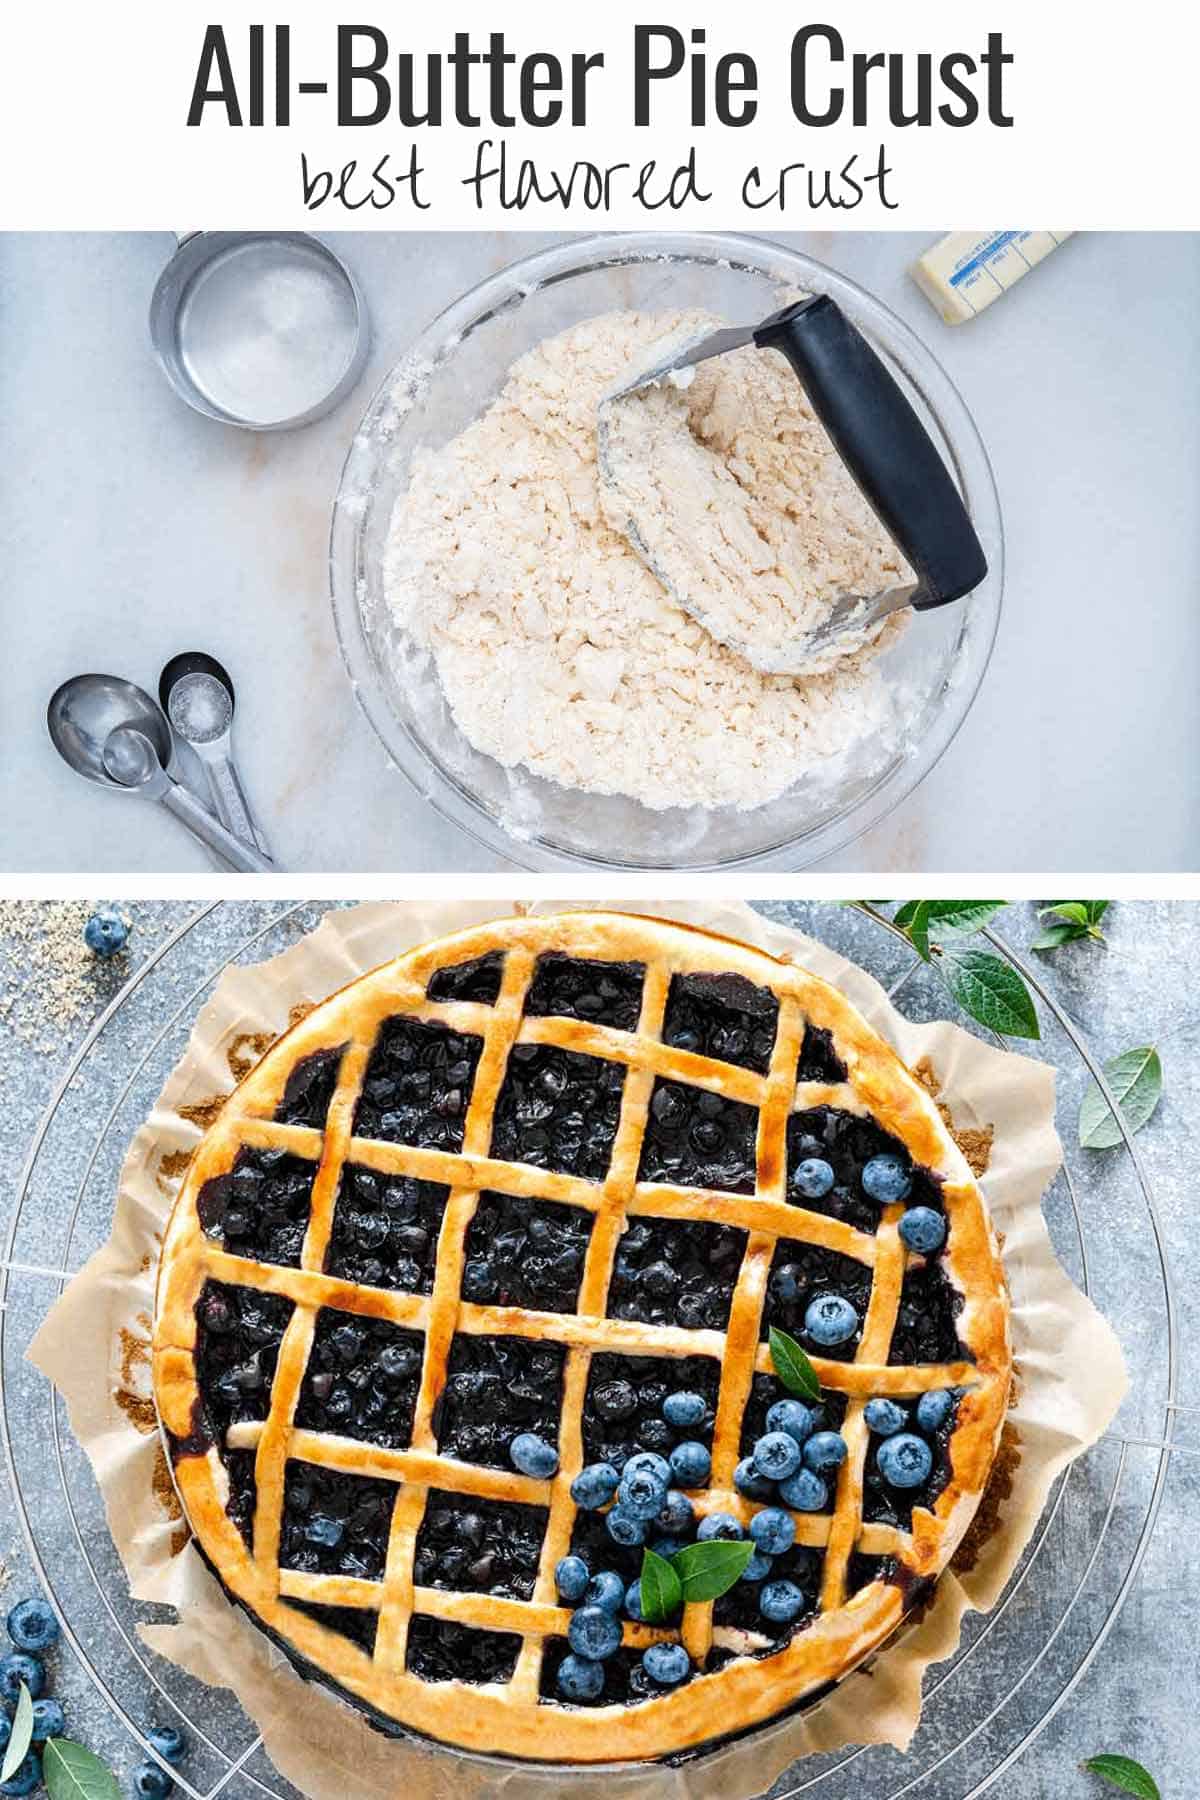 Mixing up all-butter pie crust in a bowl and a baked blueberry pie with butter crust.